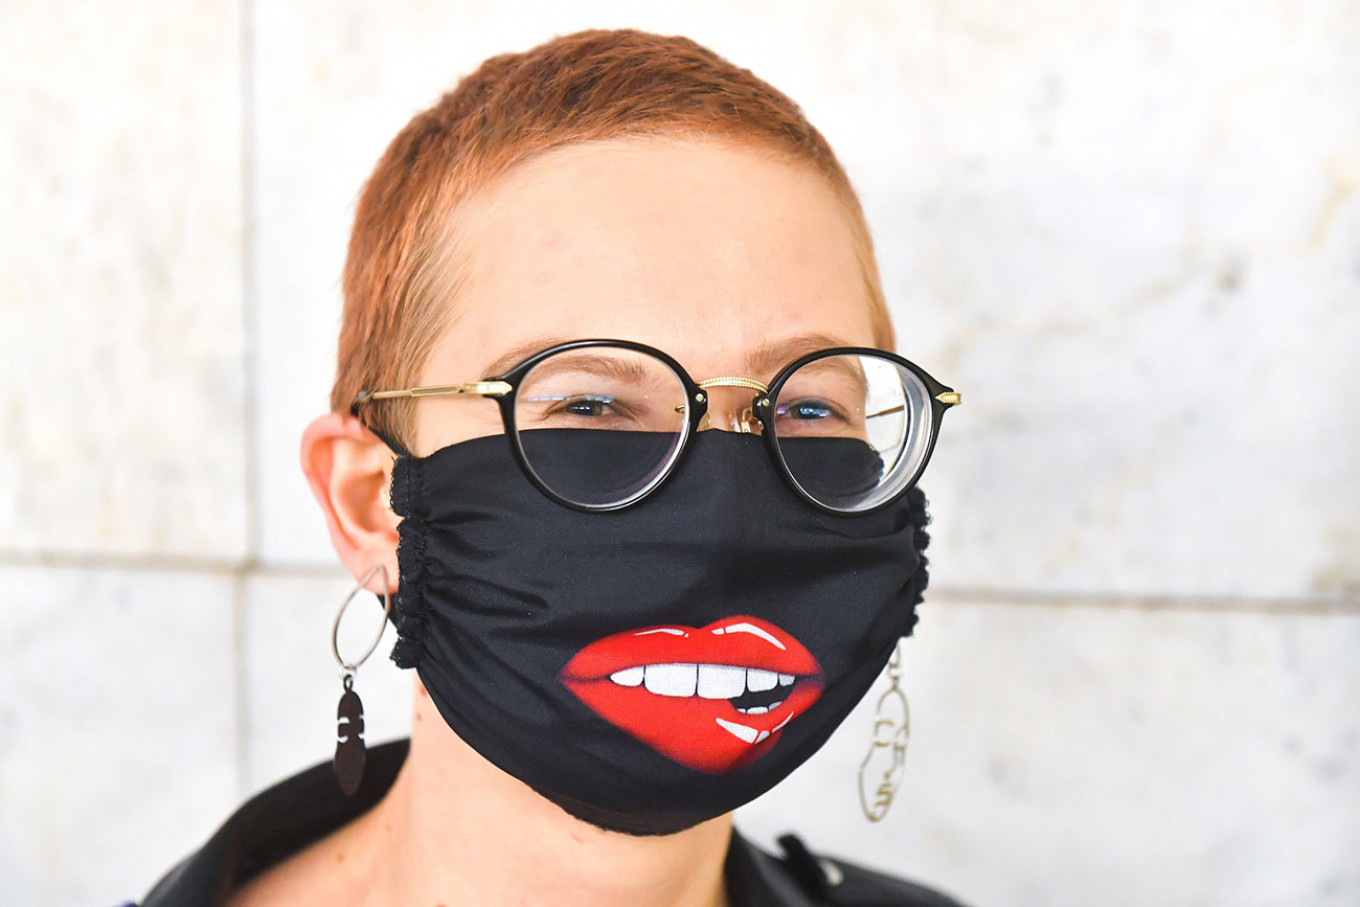 Moscow S Face Mask Fashions Embrace The Funny Weird And